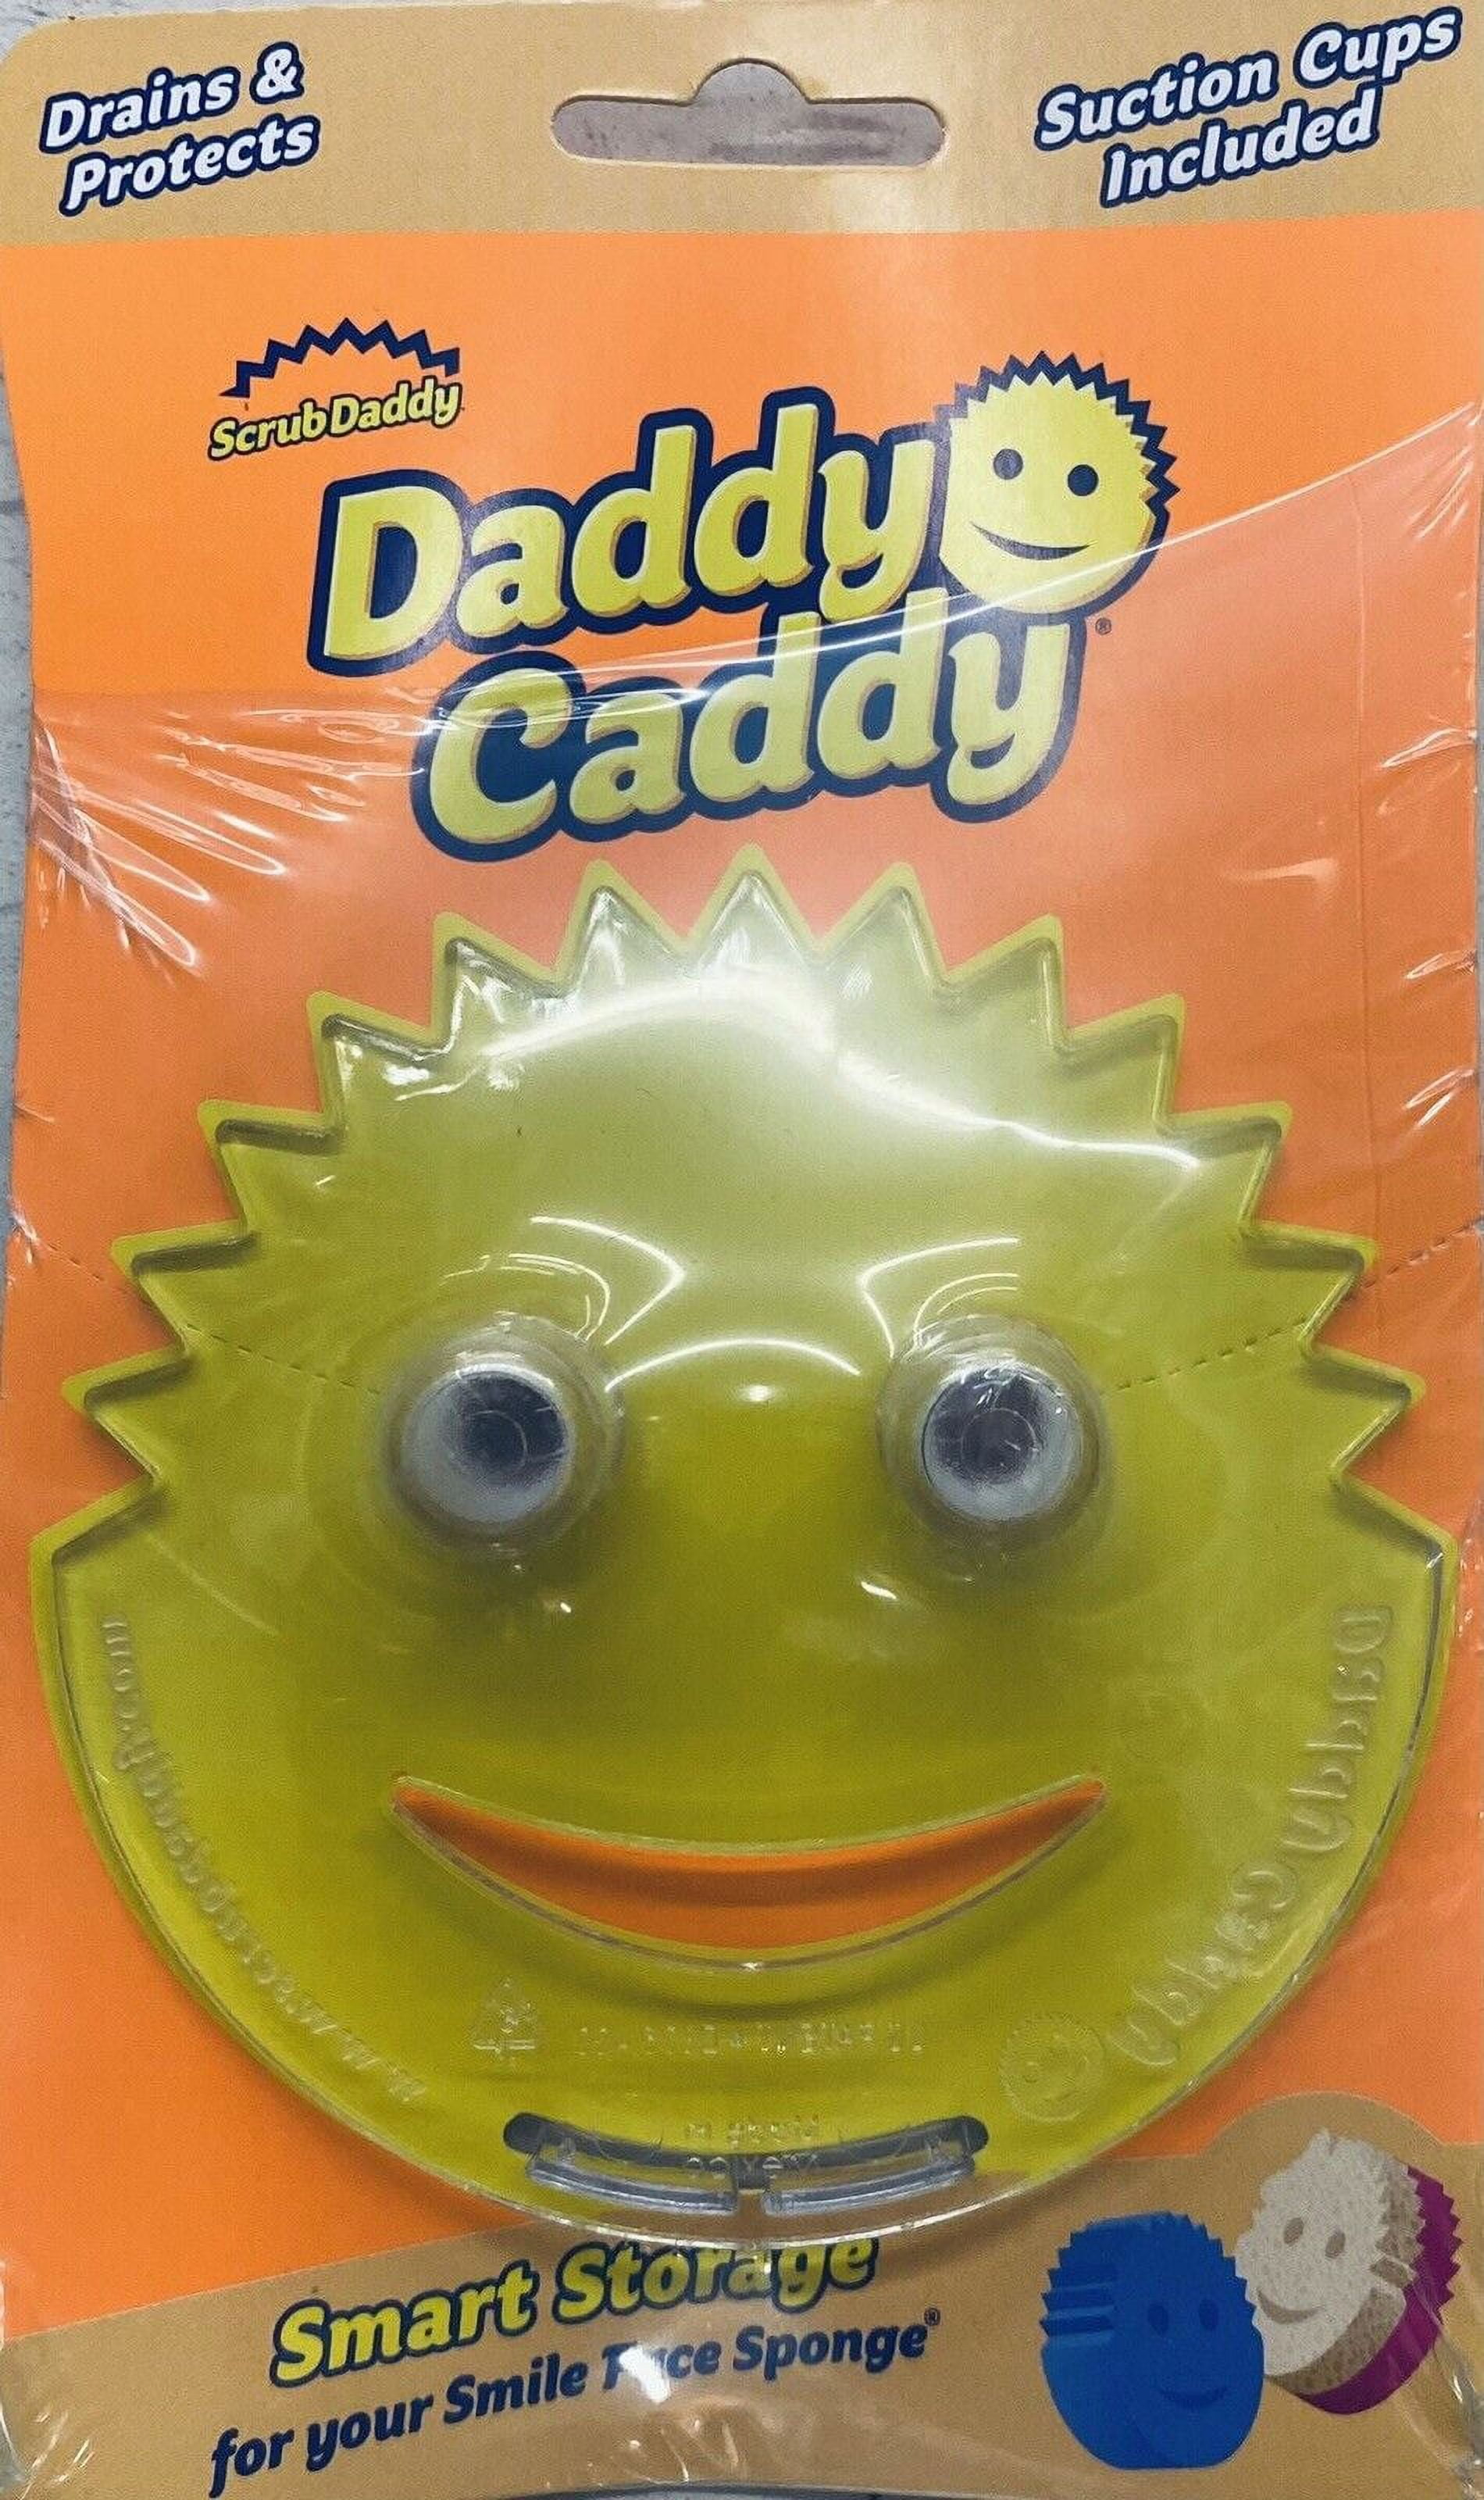 Scrub Daddy Daddy in a Caddy Sponge, 1 ct - Smith's Food and Drug